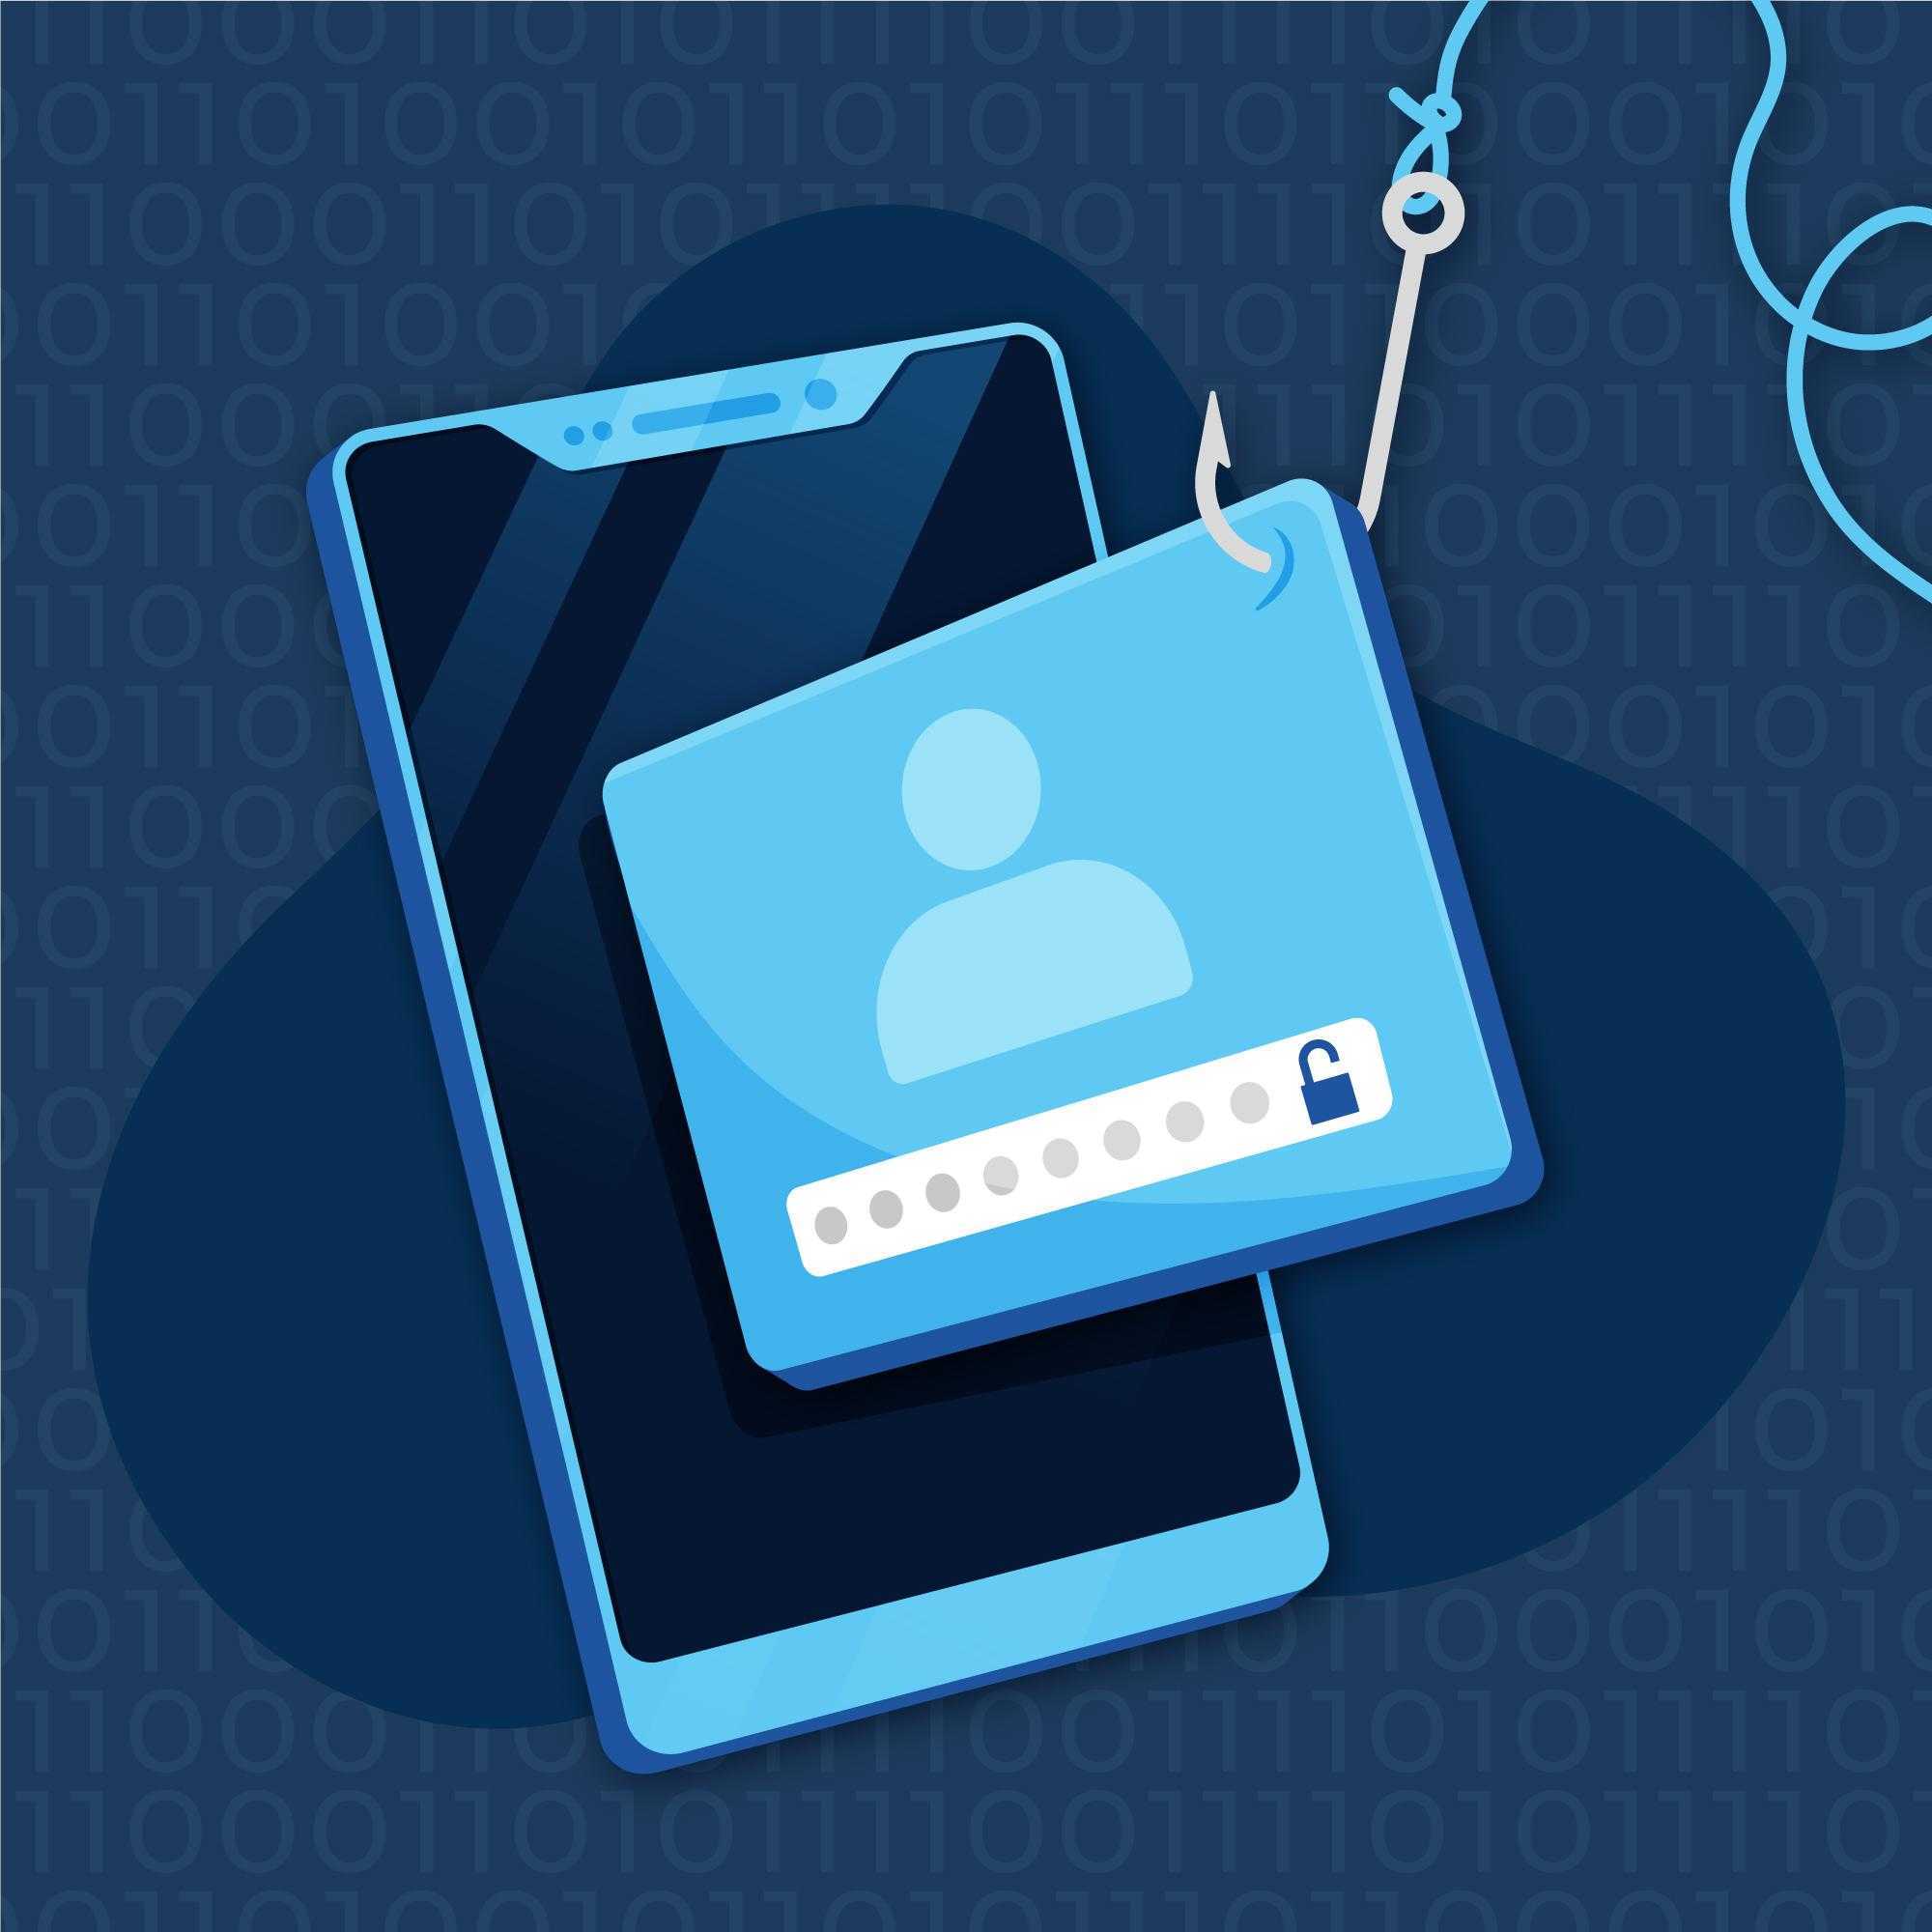 phishing information from a phone illustration